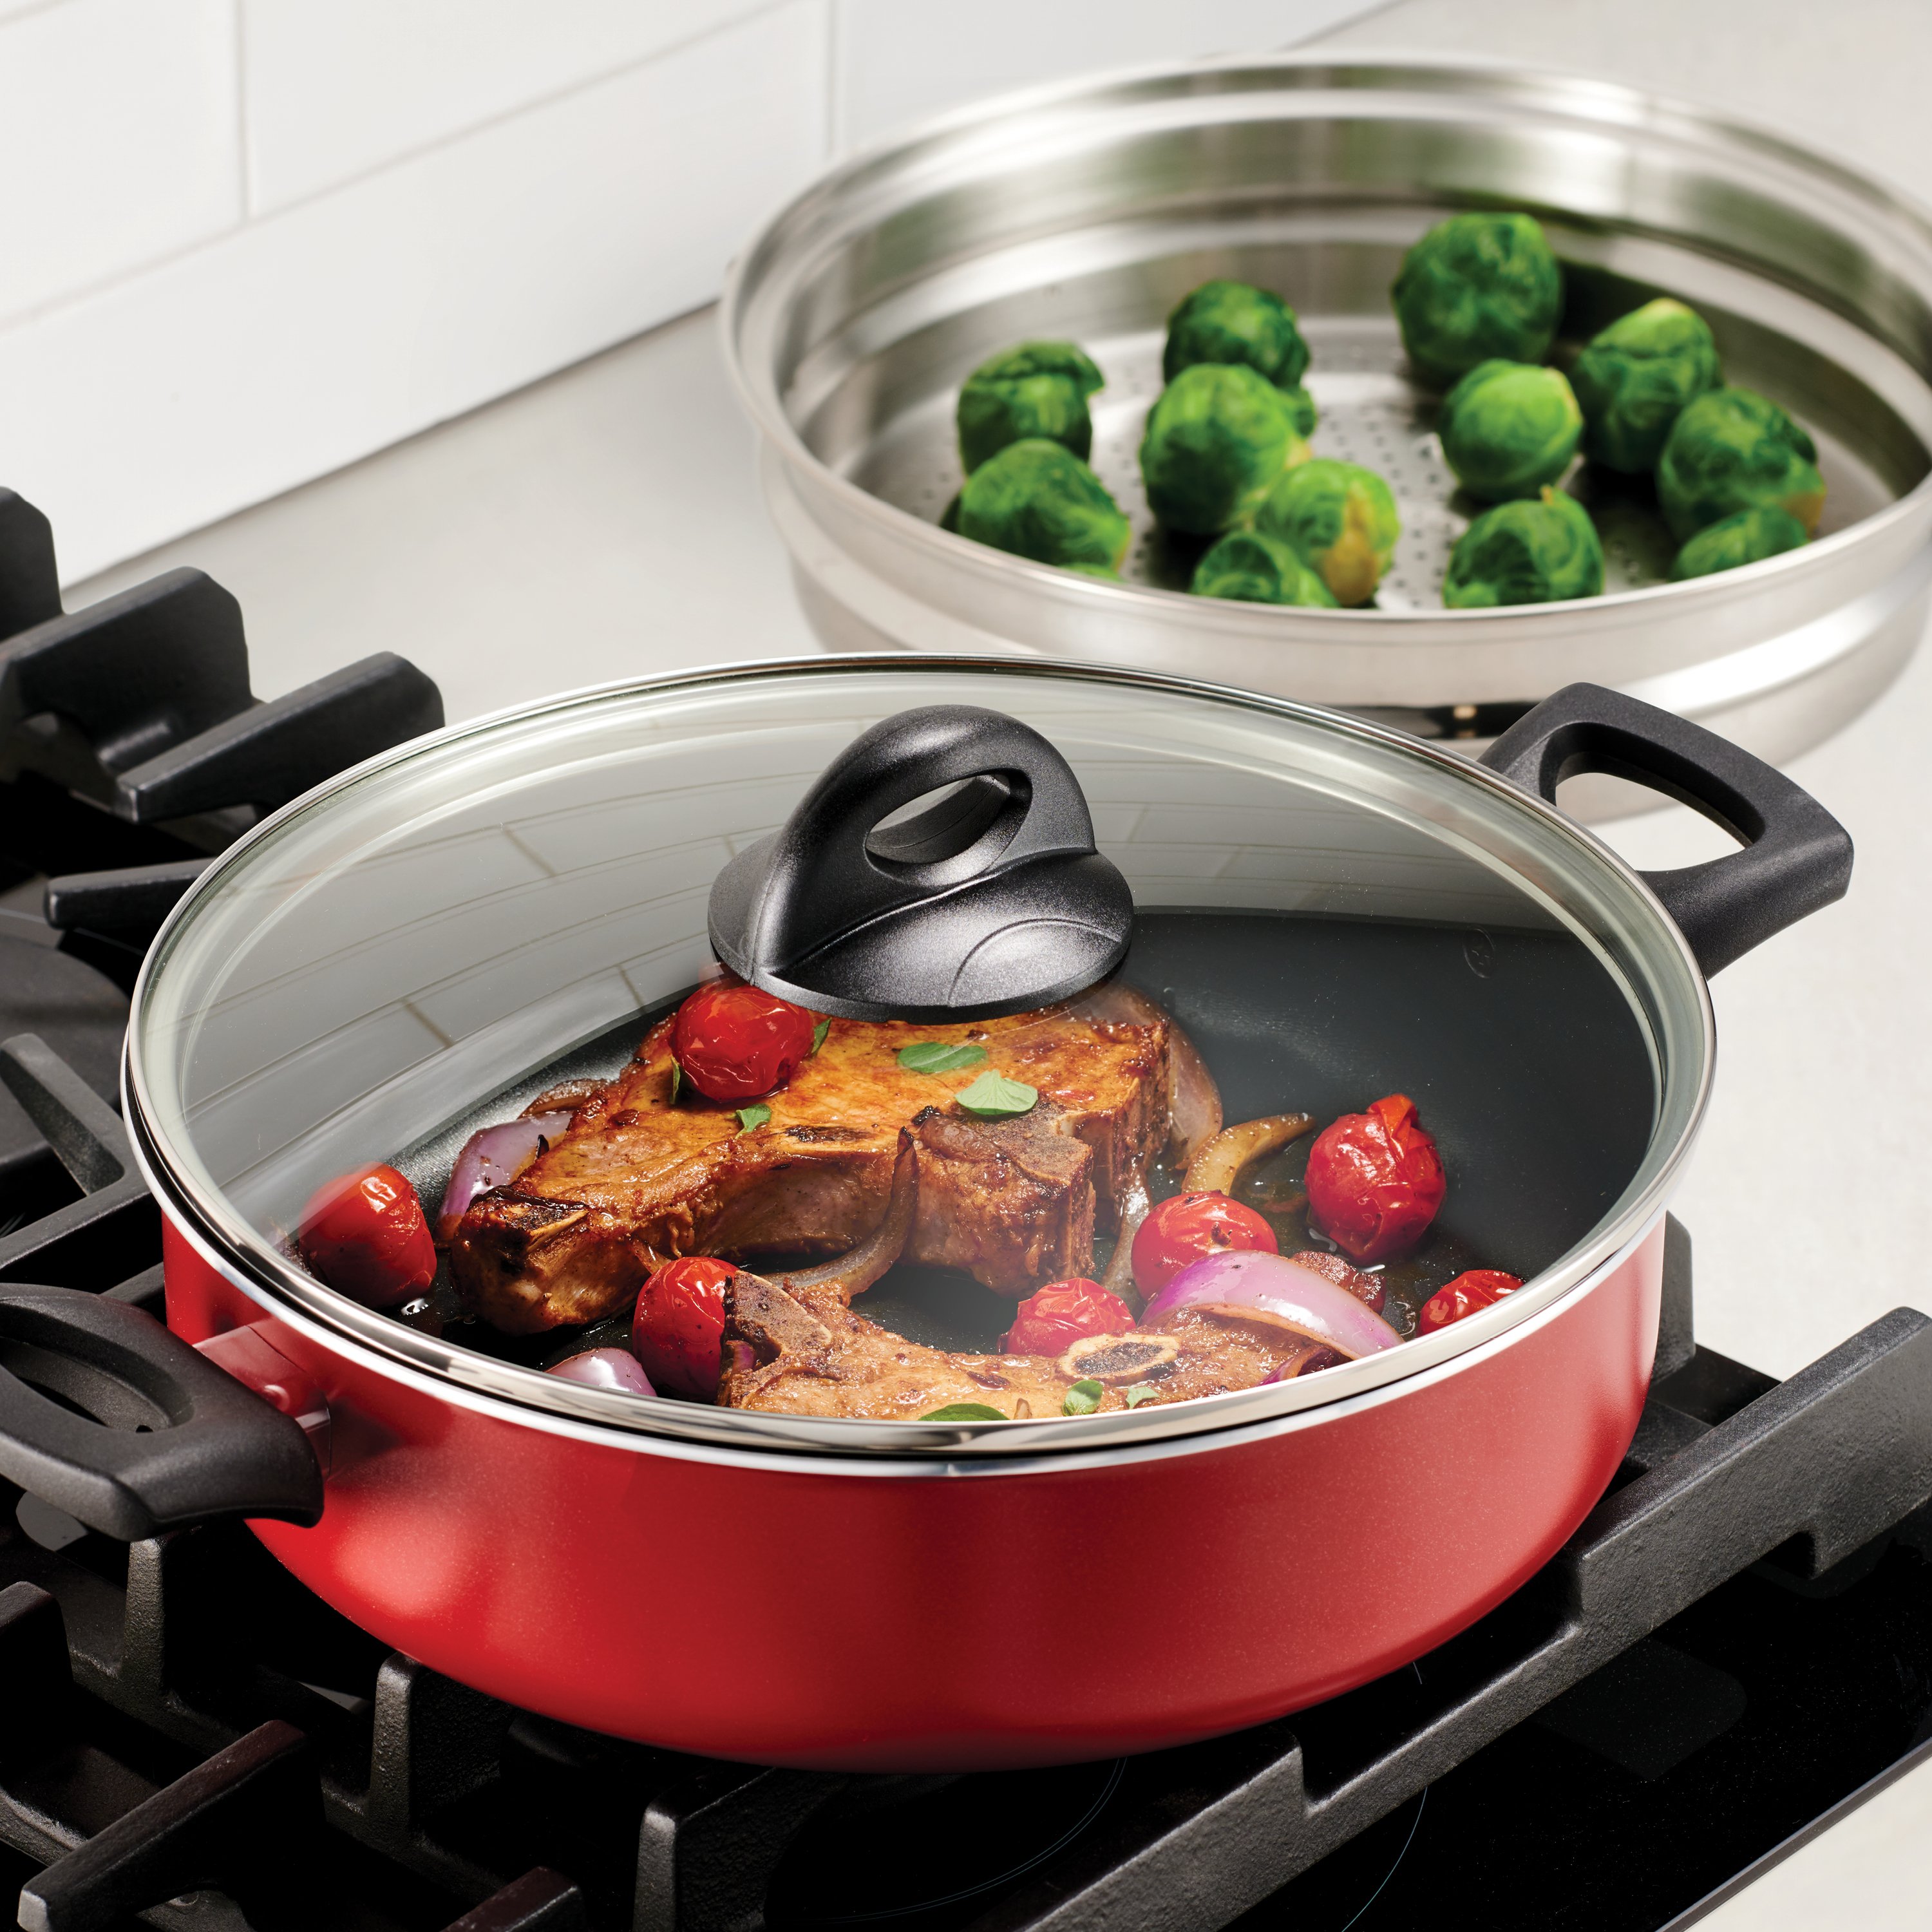 Tramontina Non-Stick Red Covered Pan with Steamer Insert - Shop Stock Pots  & Sauce Pans at H-E-B